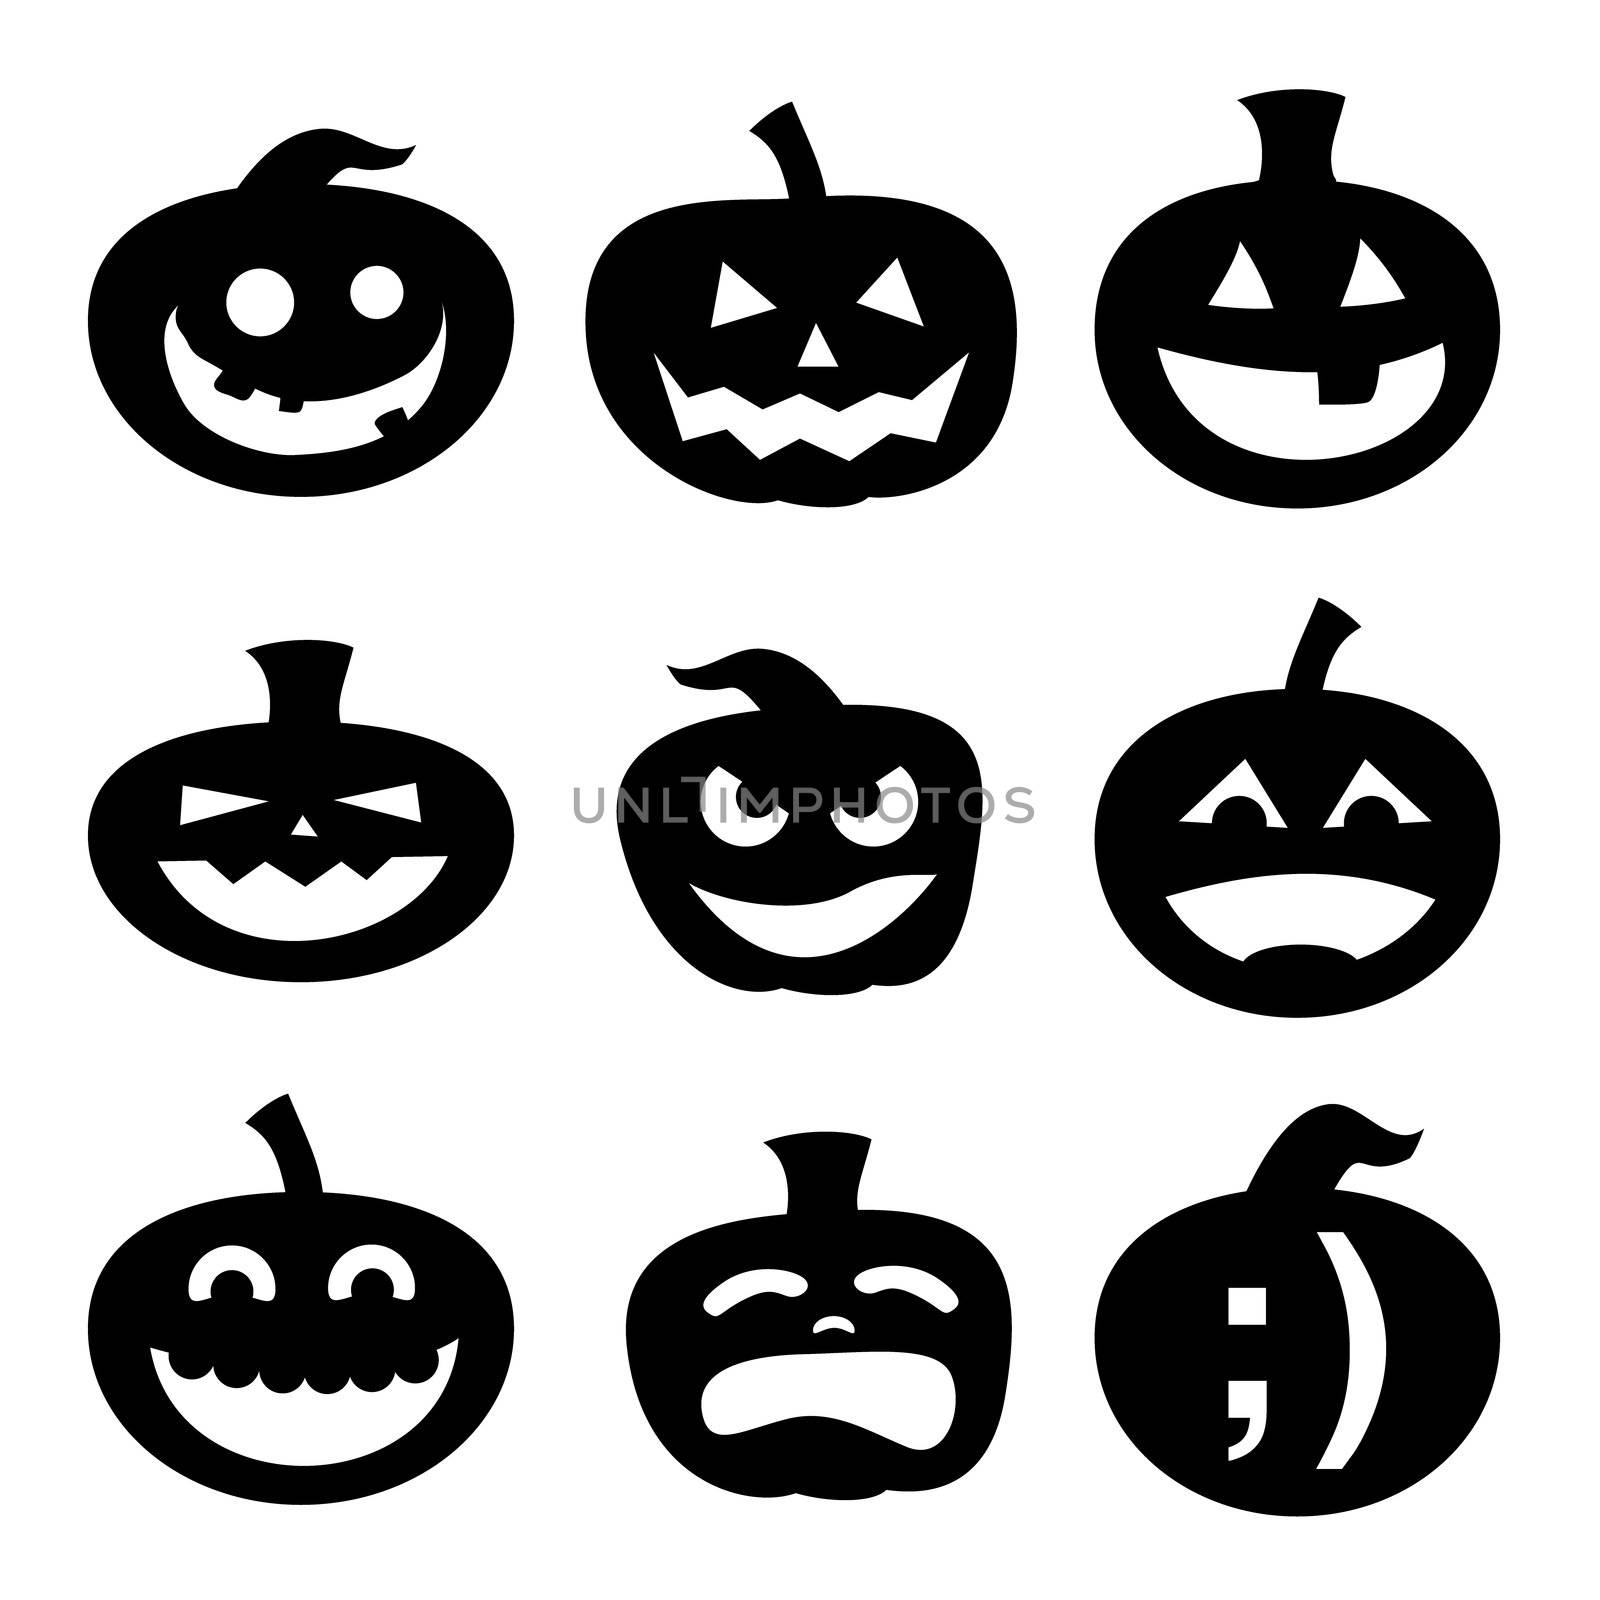 Halloween decoration Jack-o-Lantern silhouette set. Carved pumpkin designs with different facial expressions, from silly to happy to scary.